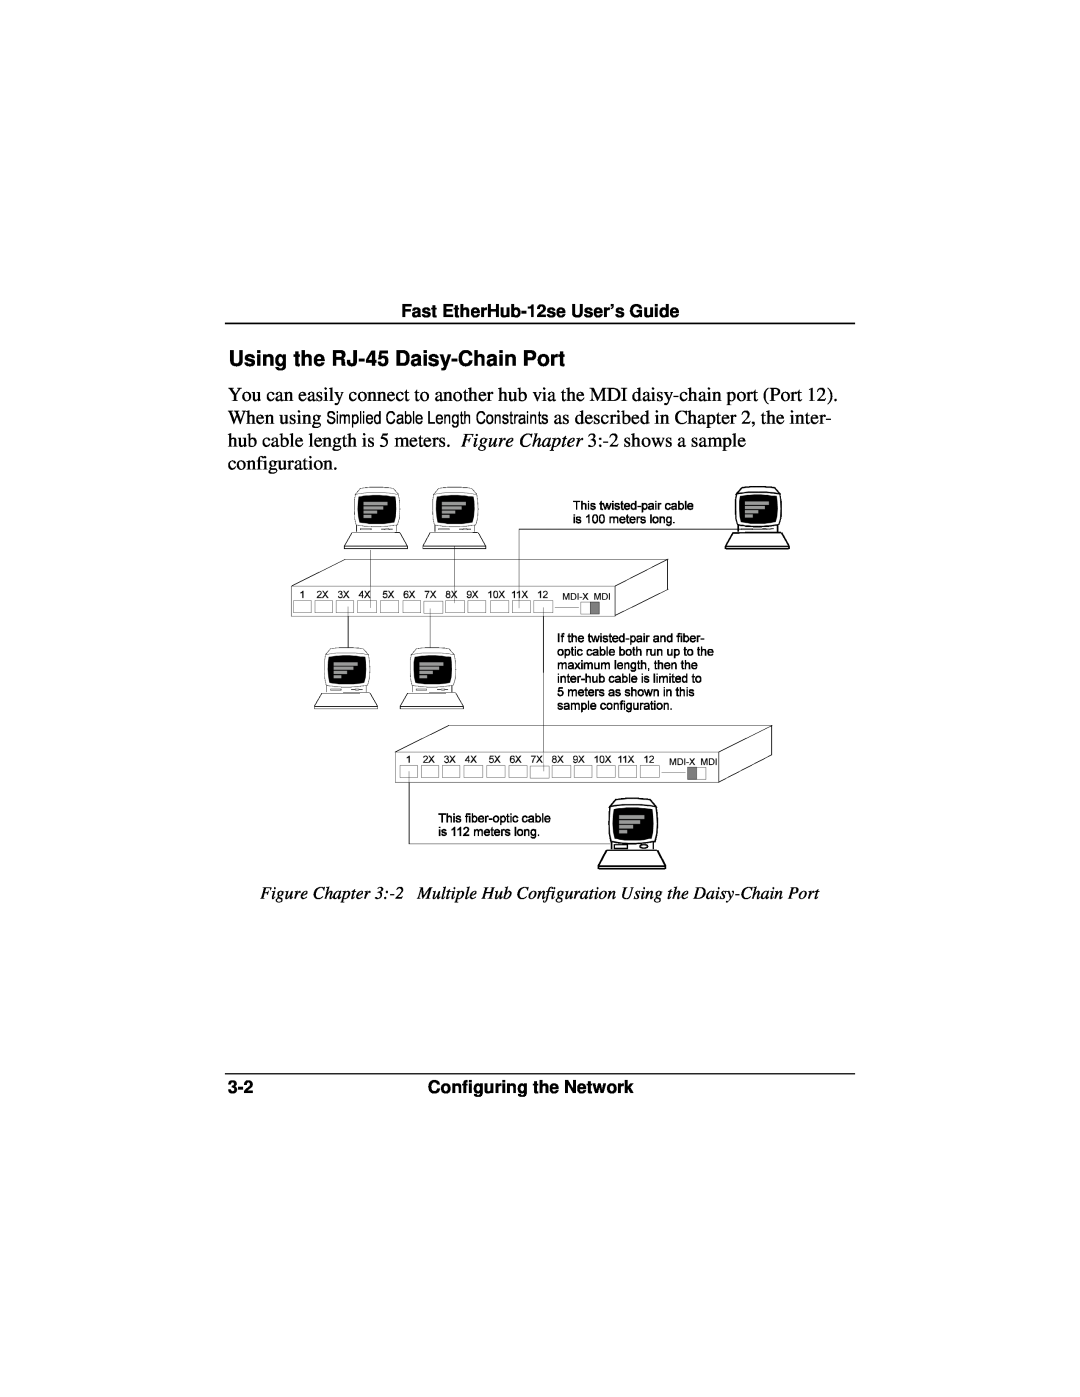 Accton Technology manual Using the RJ-45 Daisy-Chain Port, Fast EtherHub-12se User’s Guide, Configuring the Network 